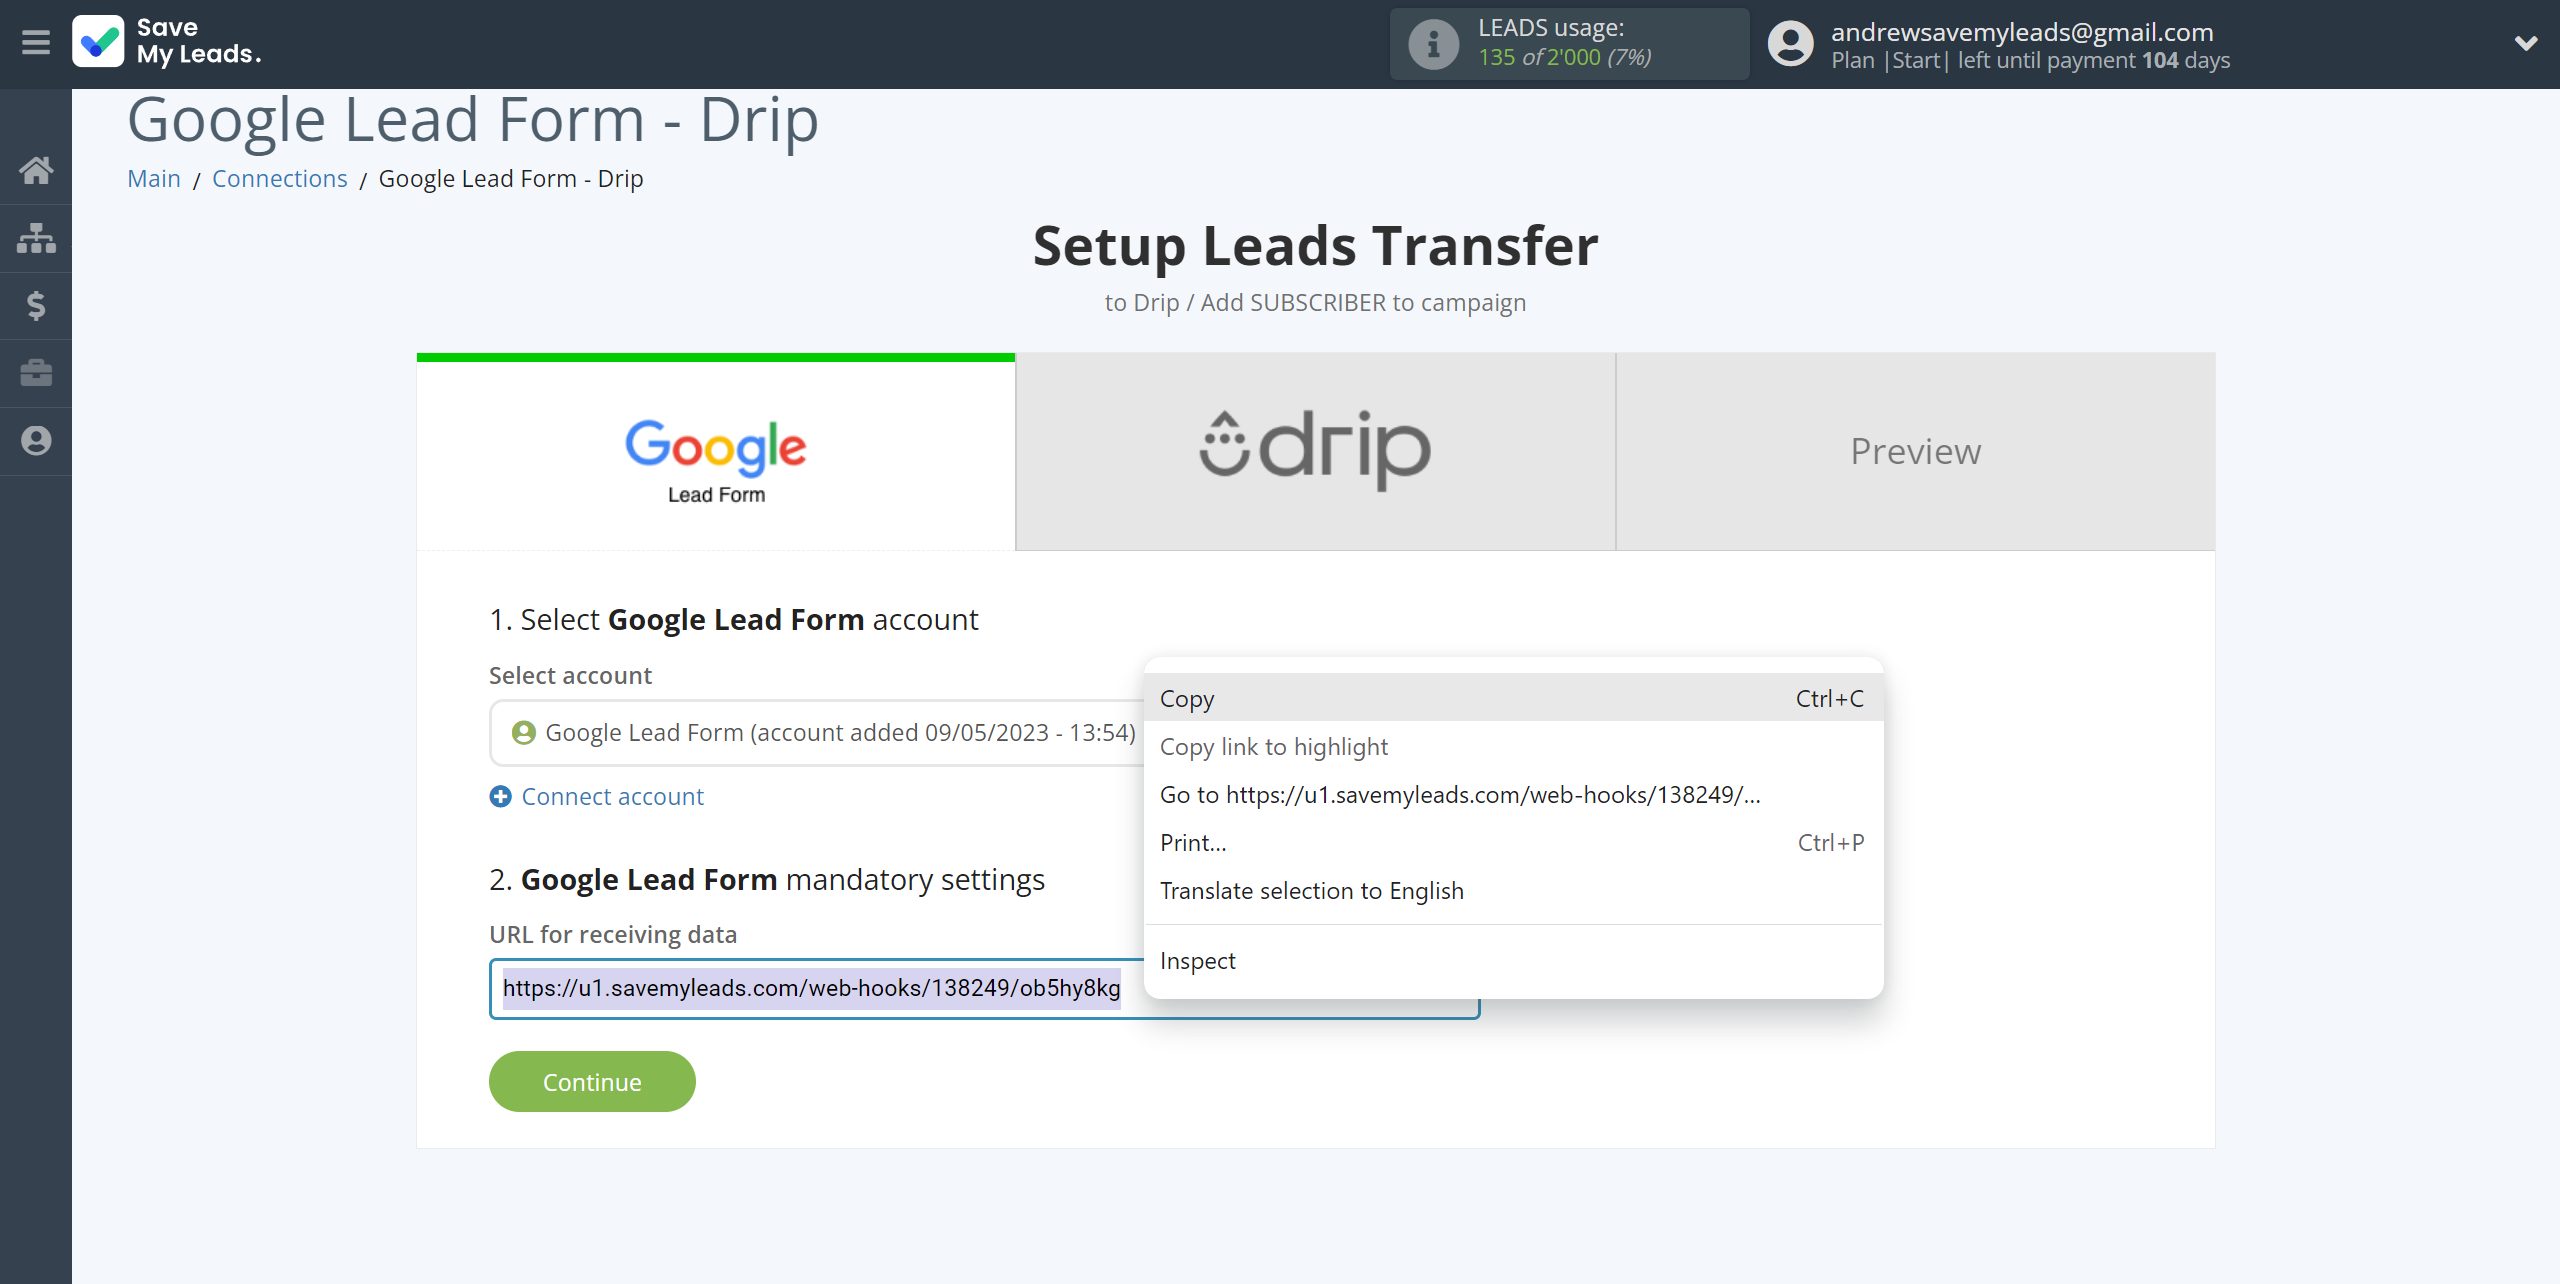 How to Connect Google Lead Form with Drip Add Subscribers to campaign | Data Source account connection